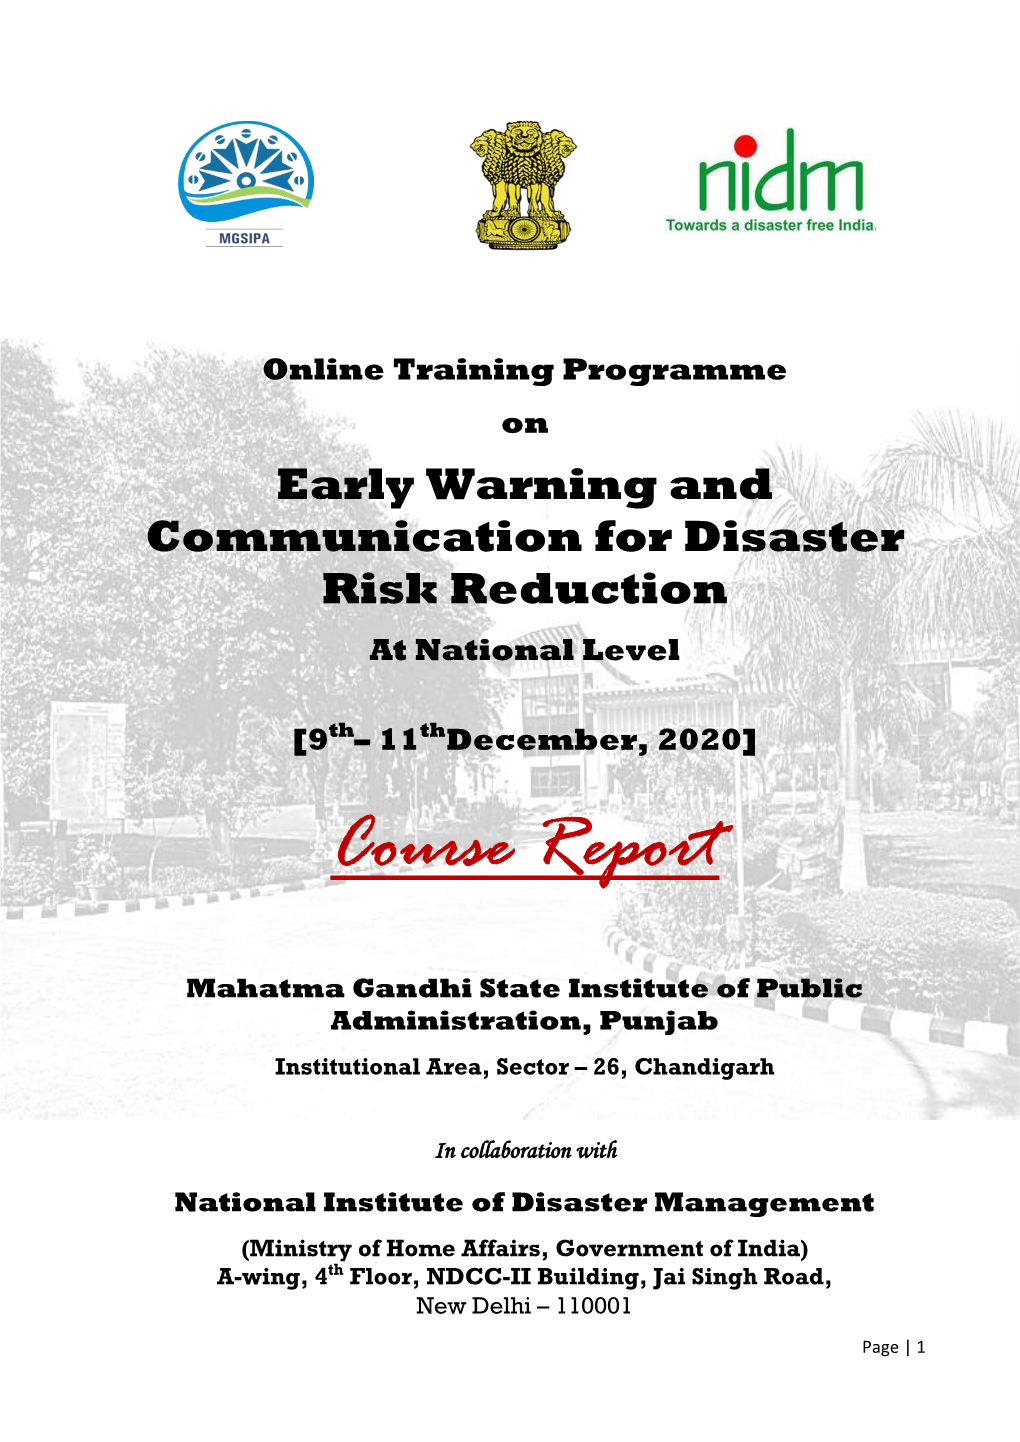 Early Warning and Communication for Disaster Risk Reduction at National Level